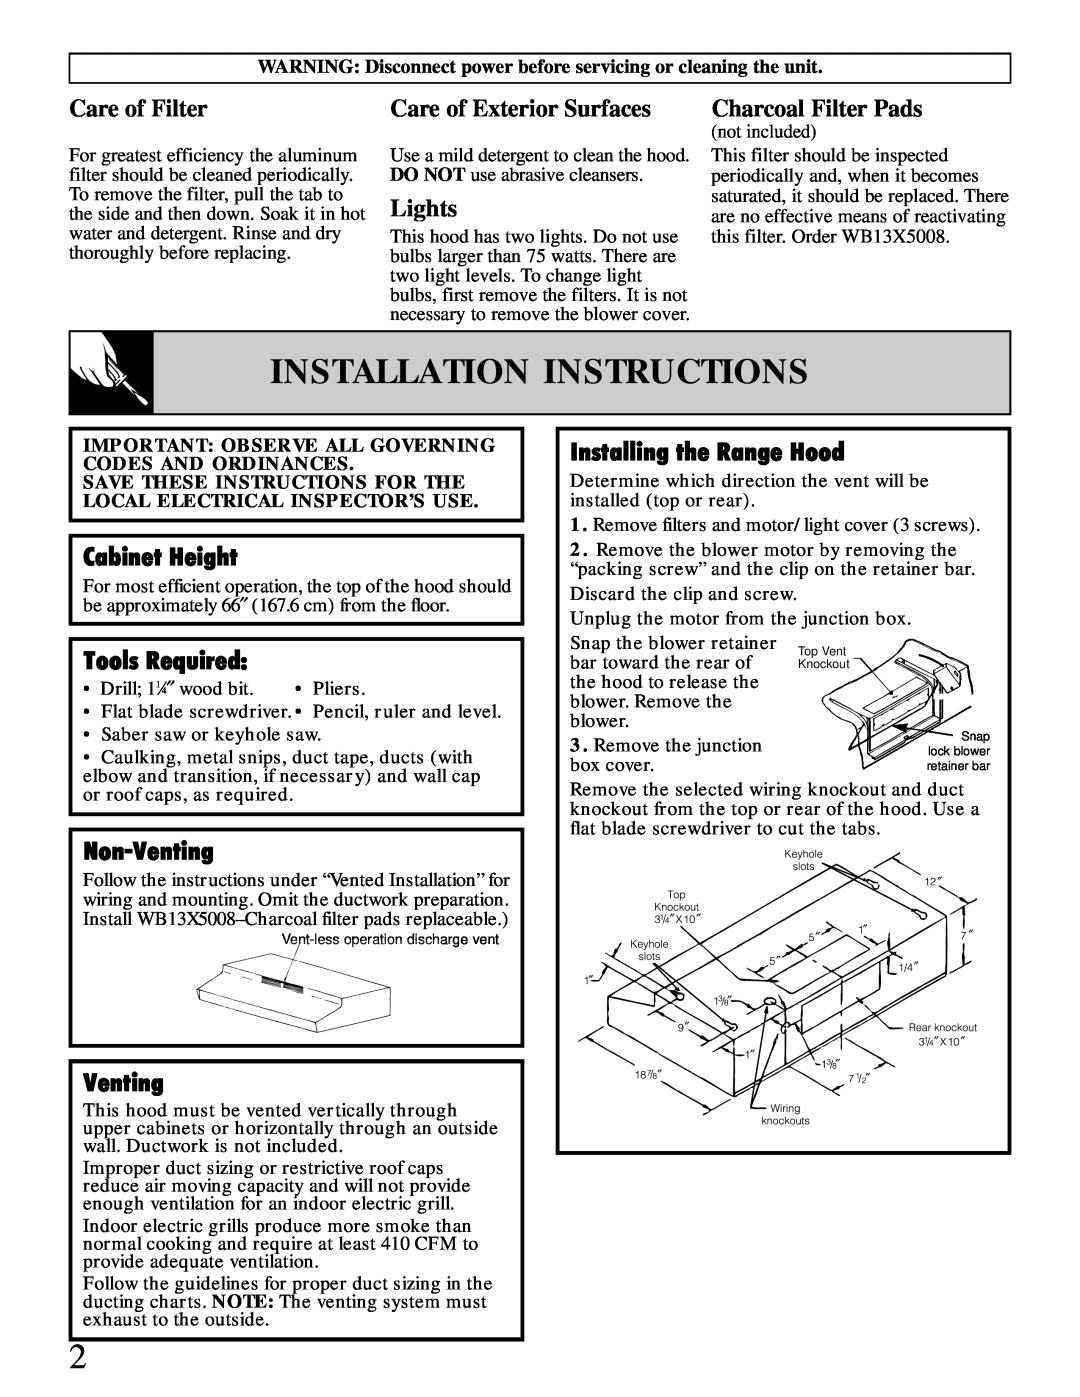 GE JV356 30 Installation Instructions, Cabinet Height, Installing the Range Hood, Tools Required, Non-Venting, Lights 